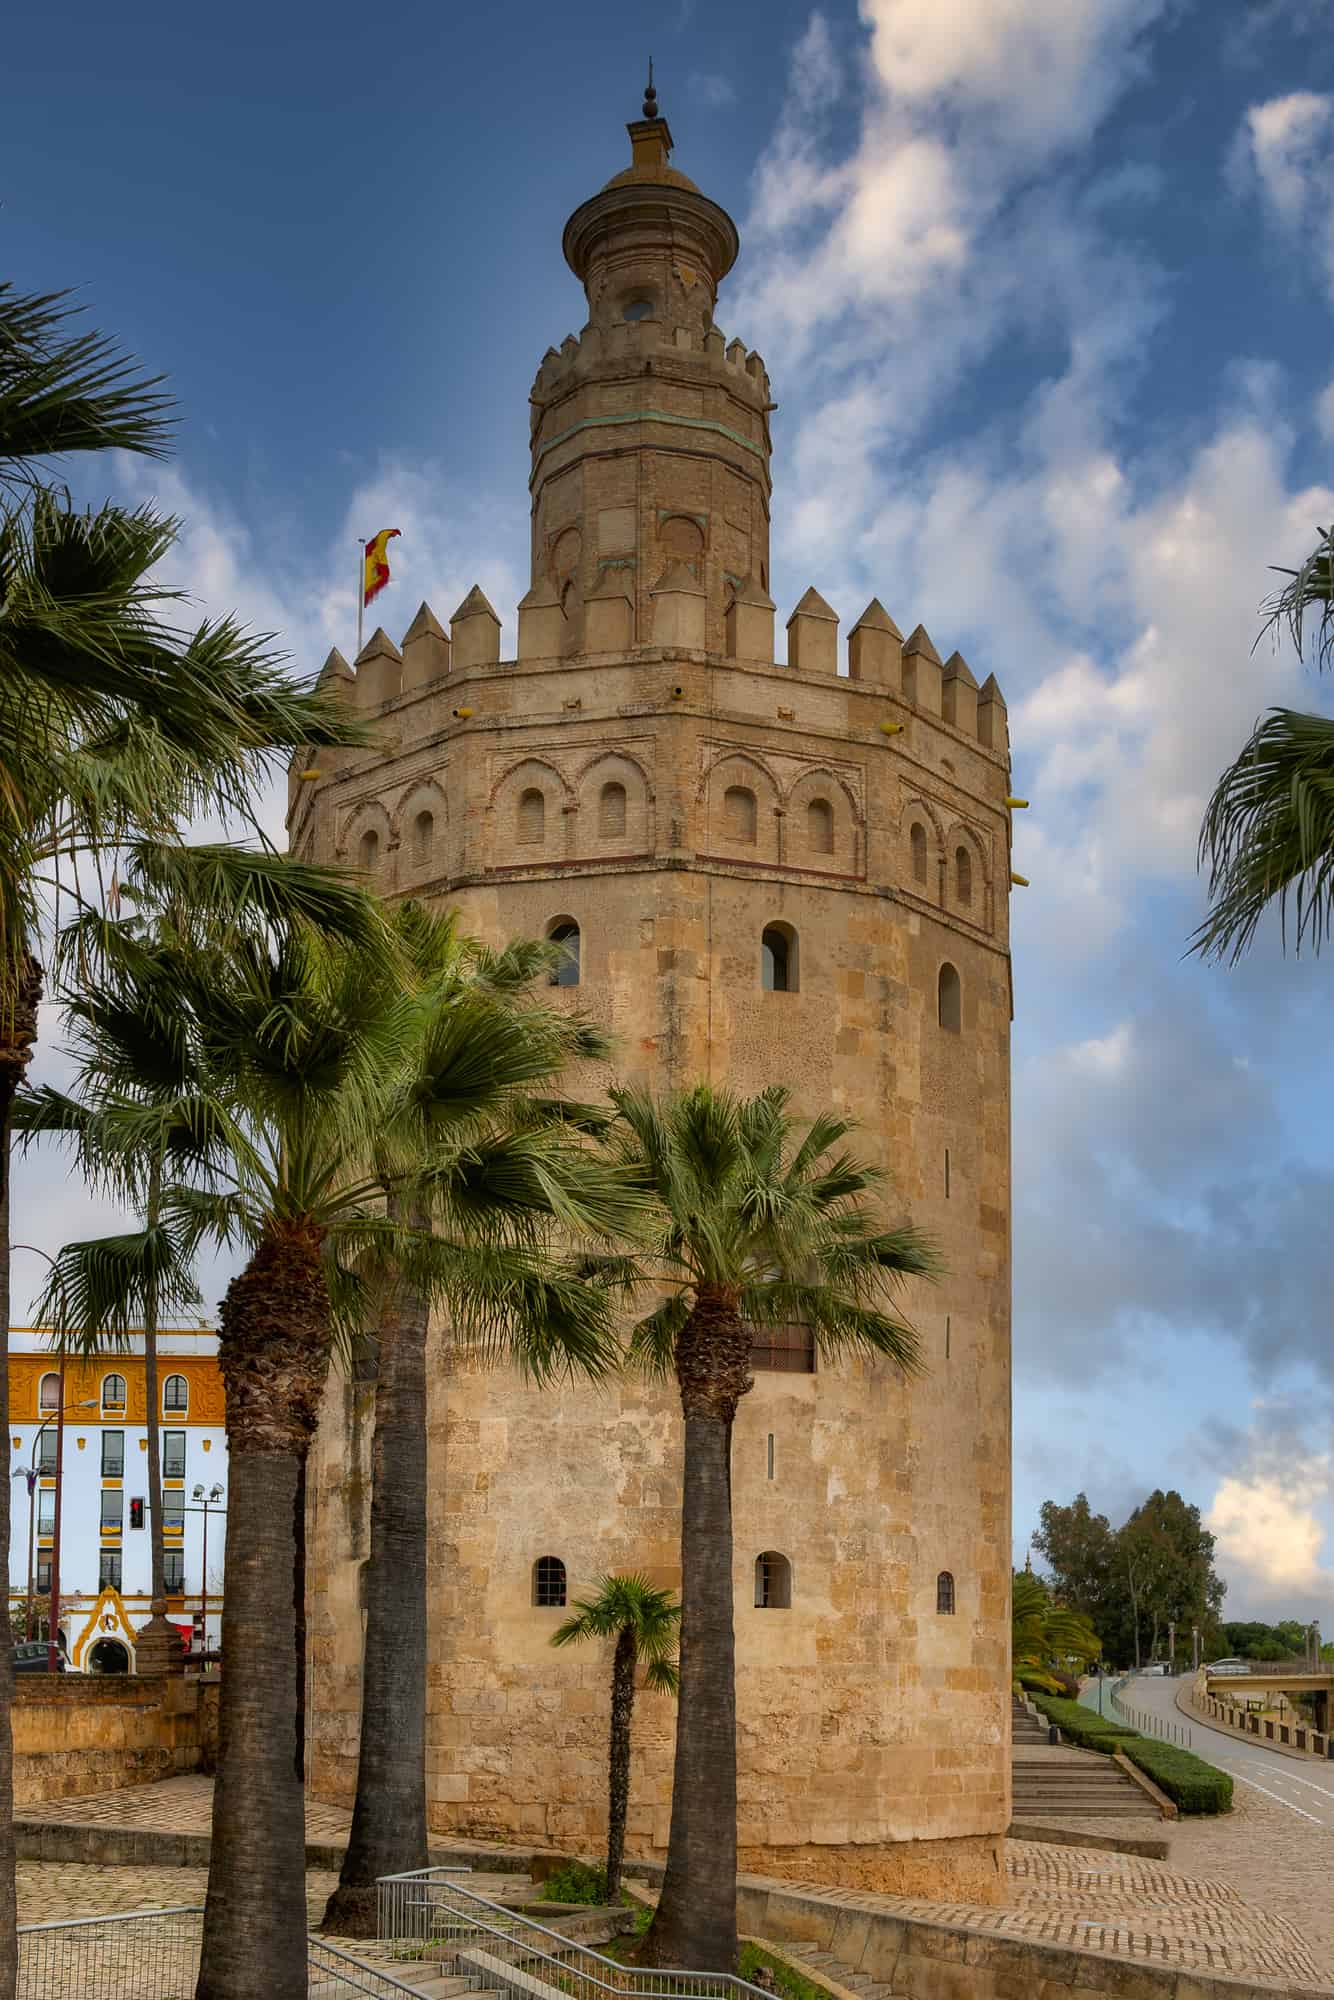 Torre del Oro on the shores of the Guadalquivir river, Seville,